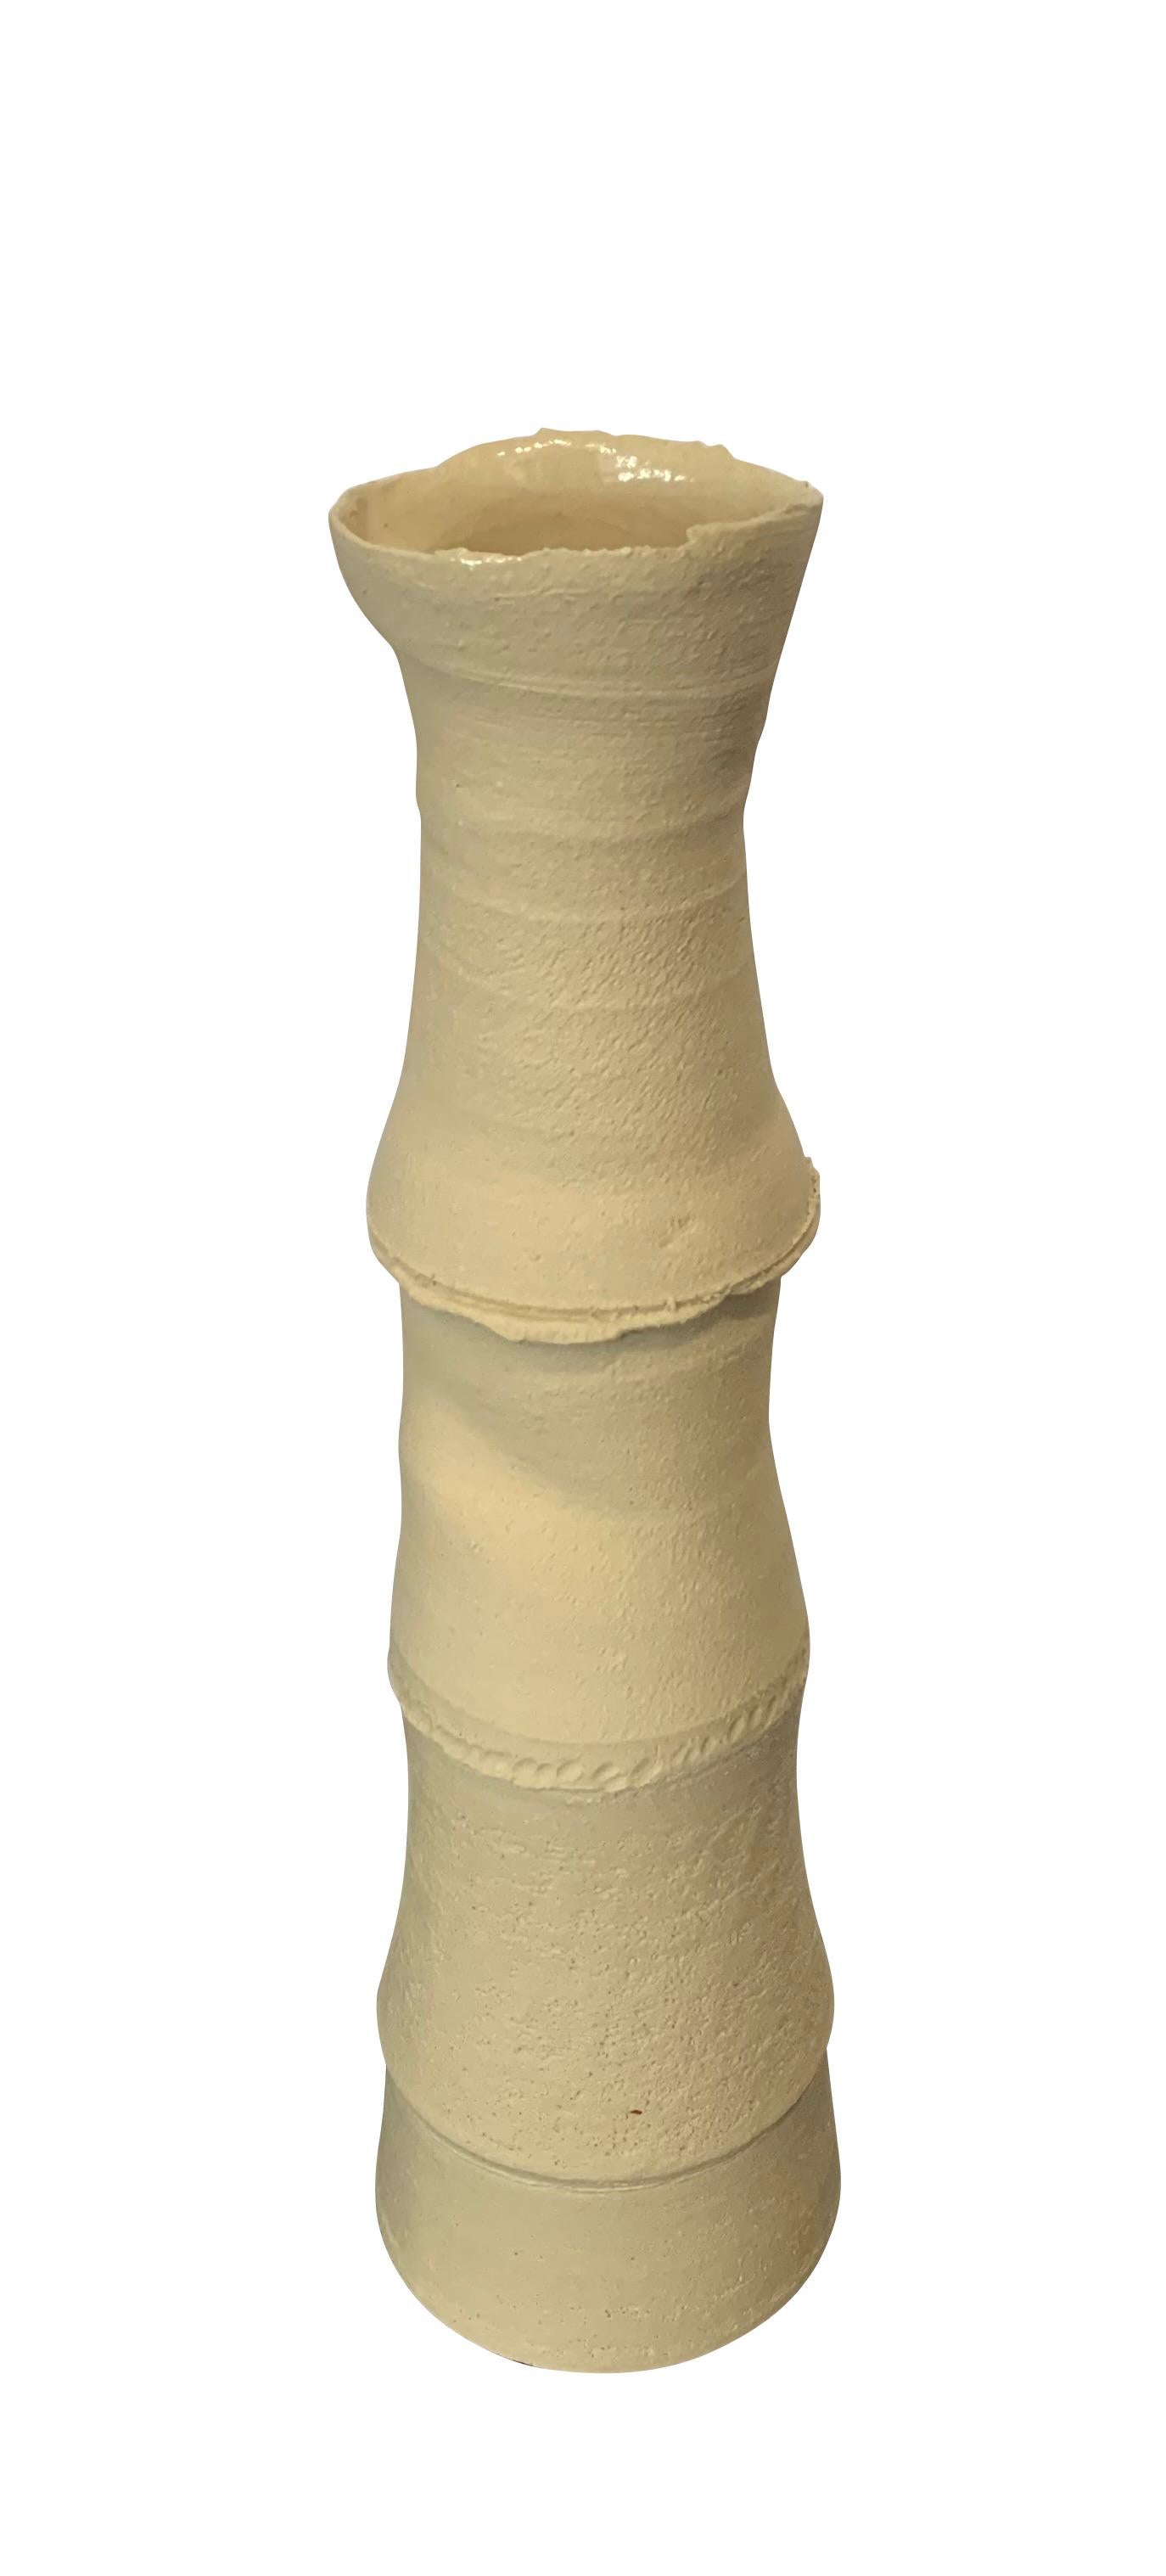 Contemporary German handmade stoneware vase.
Vertebrae design.
Sand color stoneware.
Small lip opening.
Part of a large collection of handmade vases of different sizes , shapes and textures.